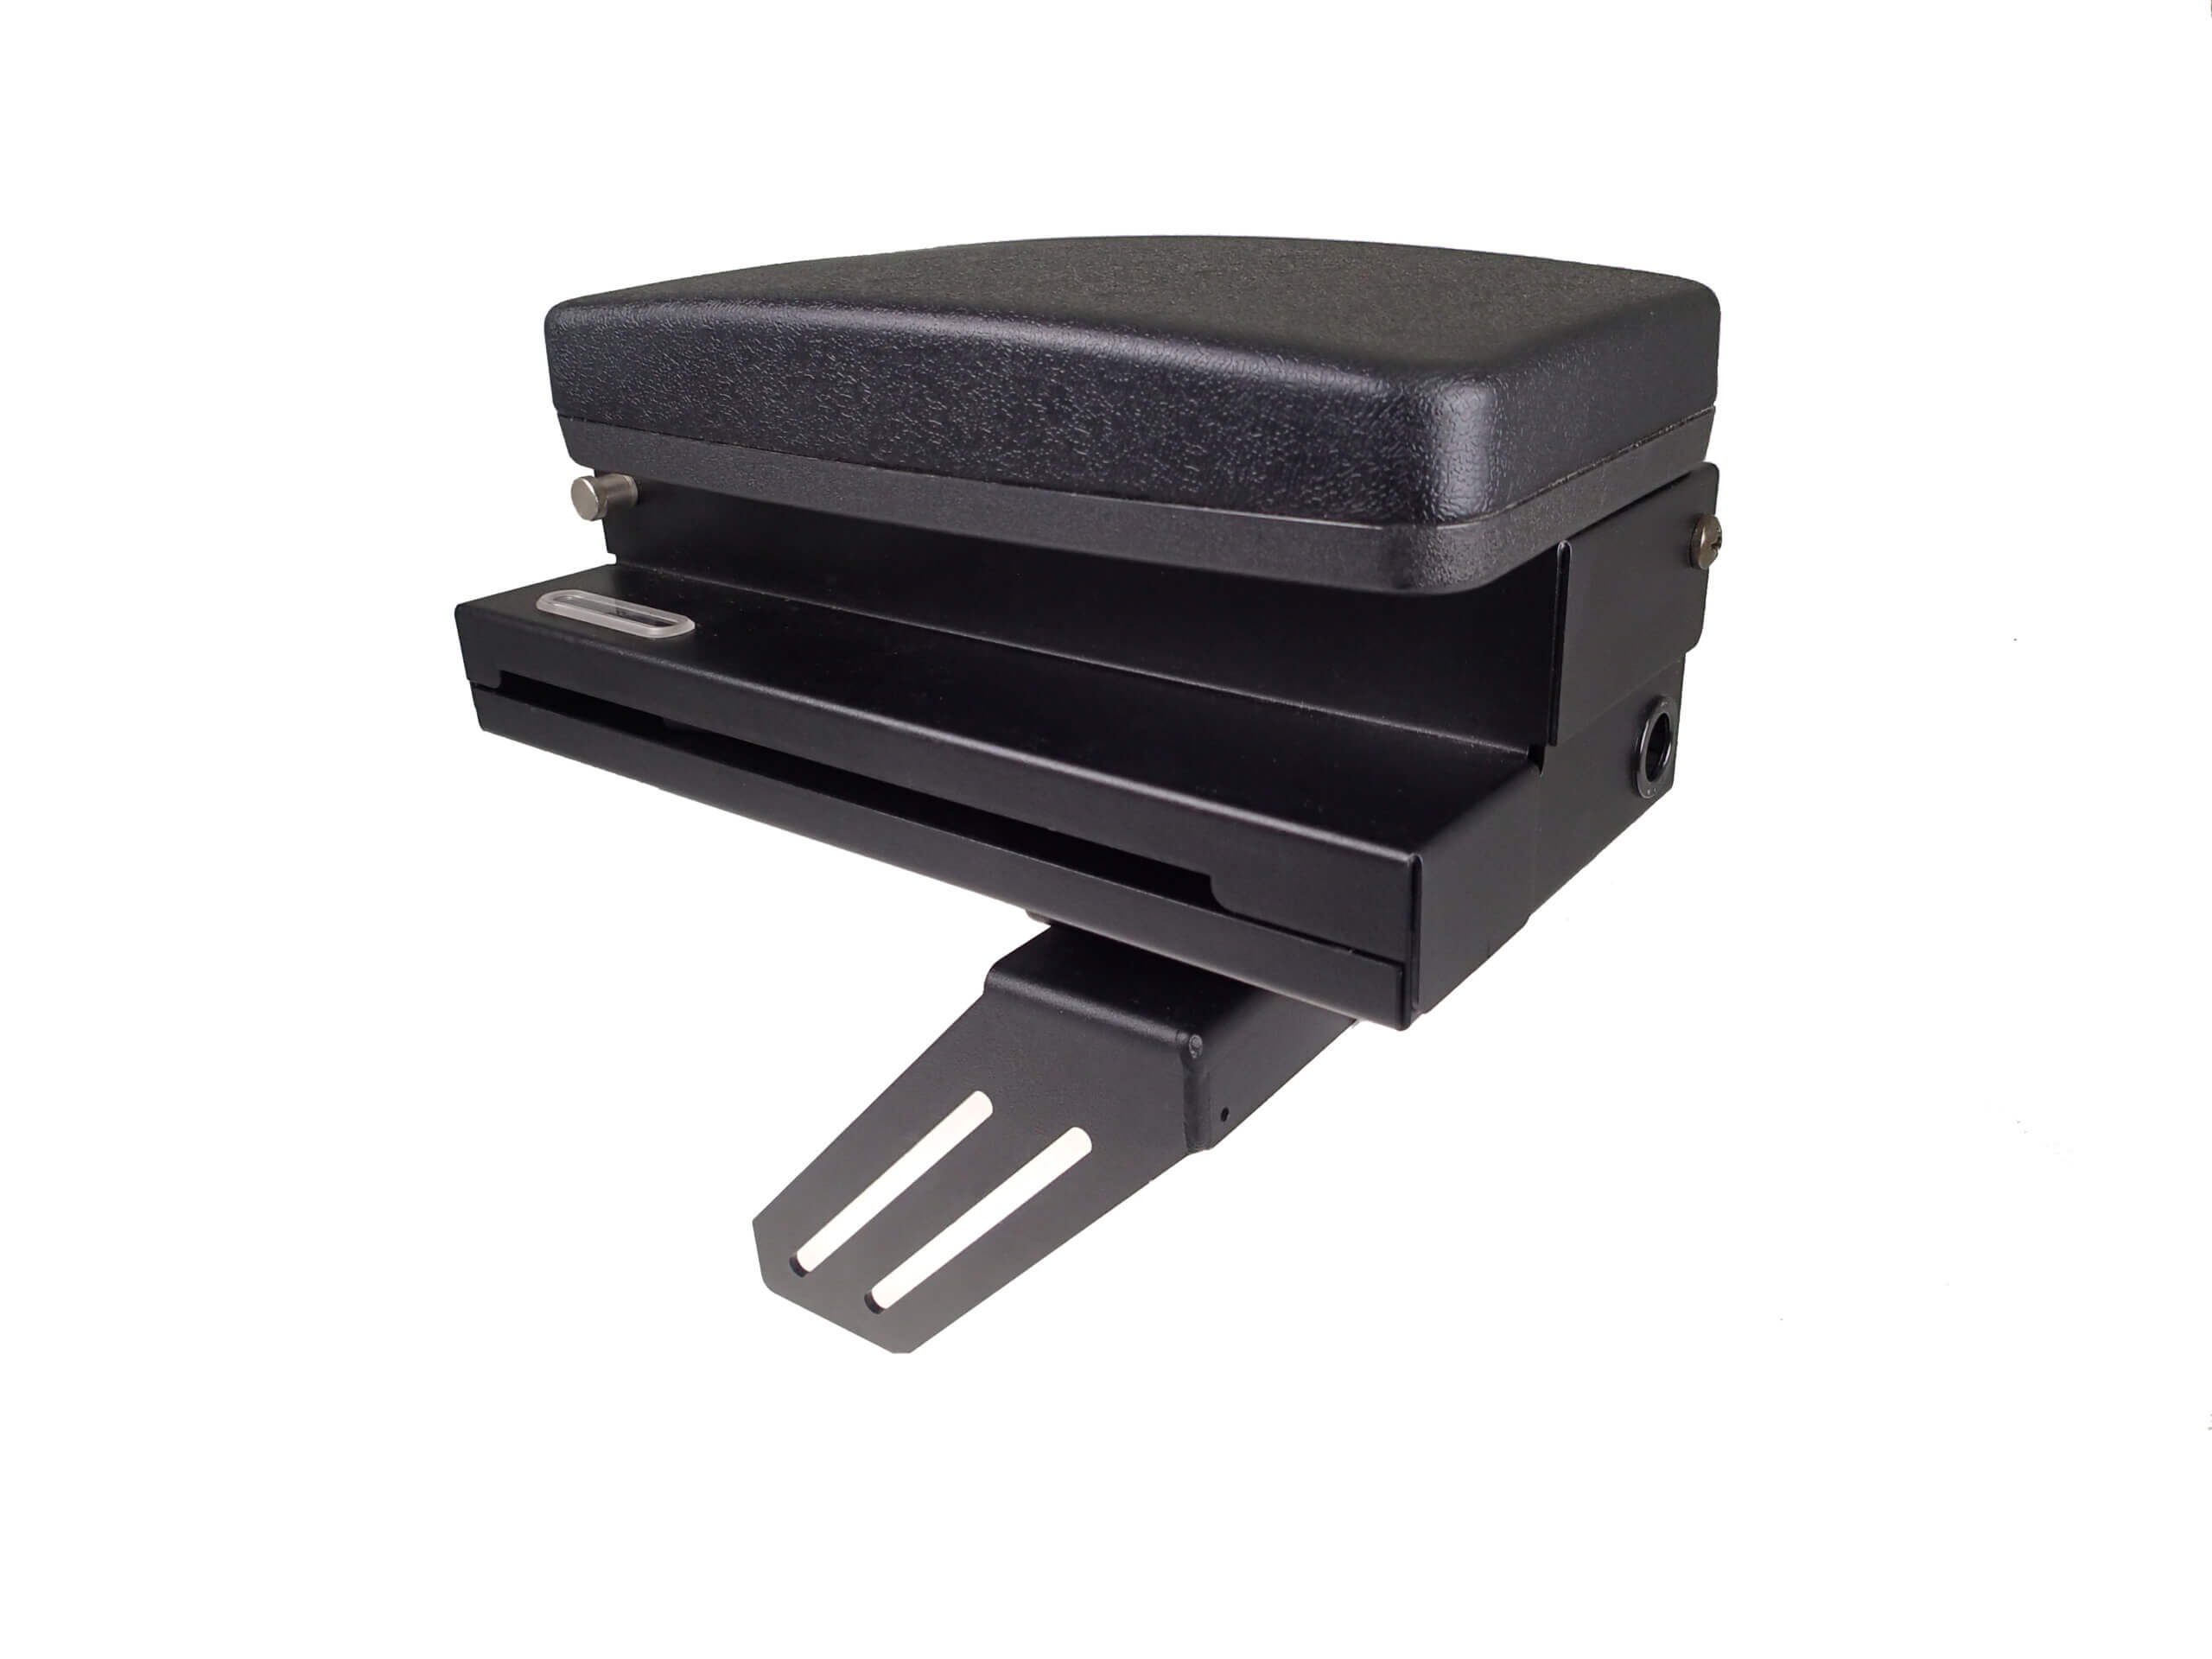 DISCONTINUED – Brother PocketJet Roll-Feed Printer Mount and Arm Rest: Top Mount